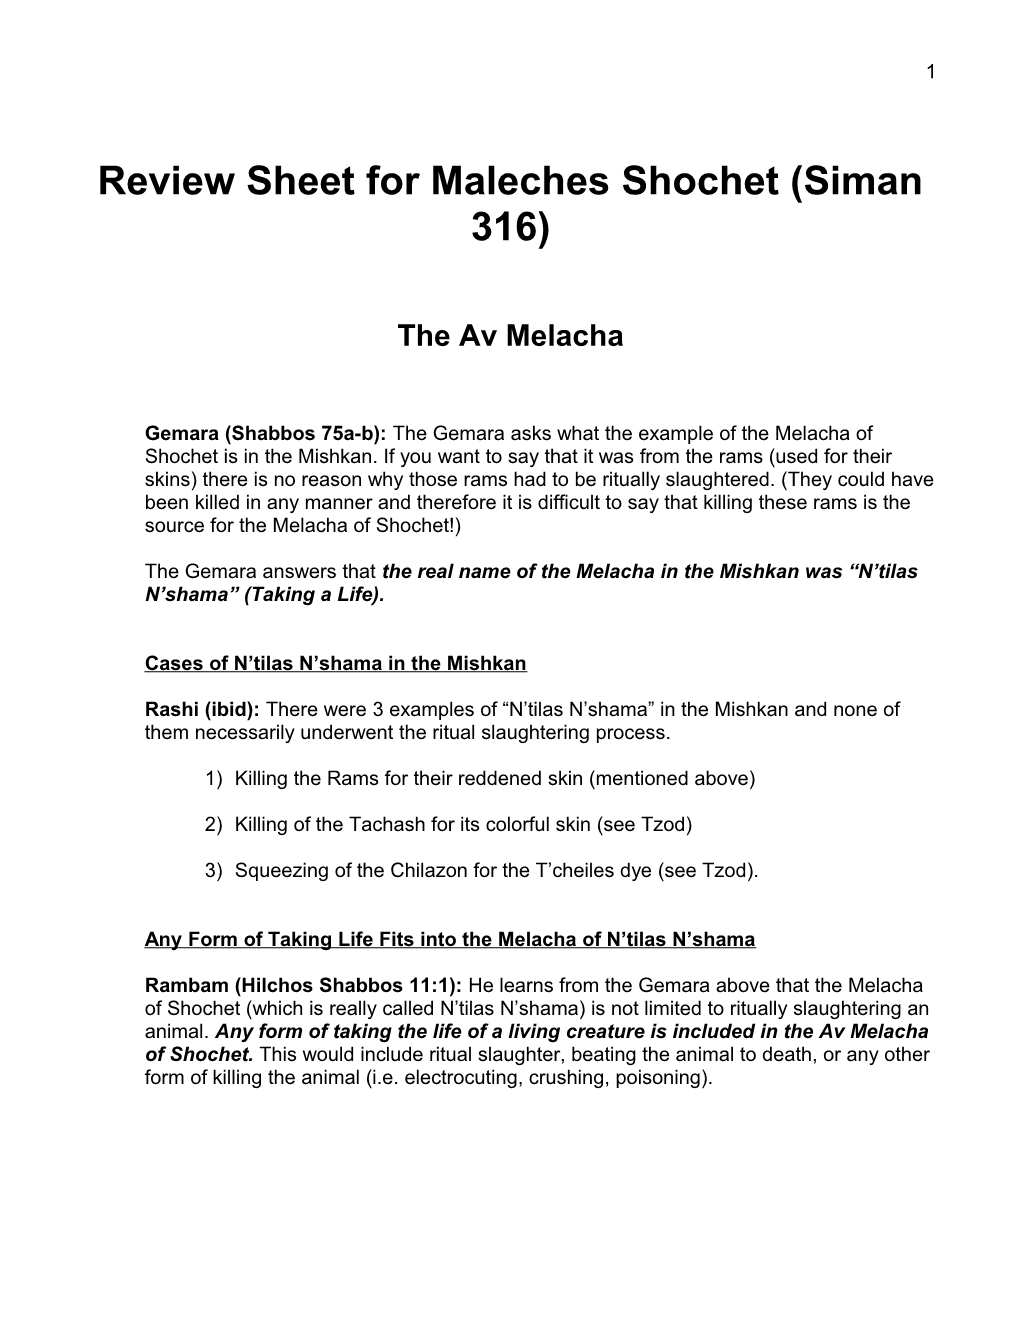 Review Sheet for Maleches Shochet (Siman 316)